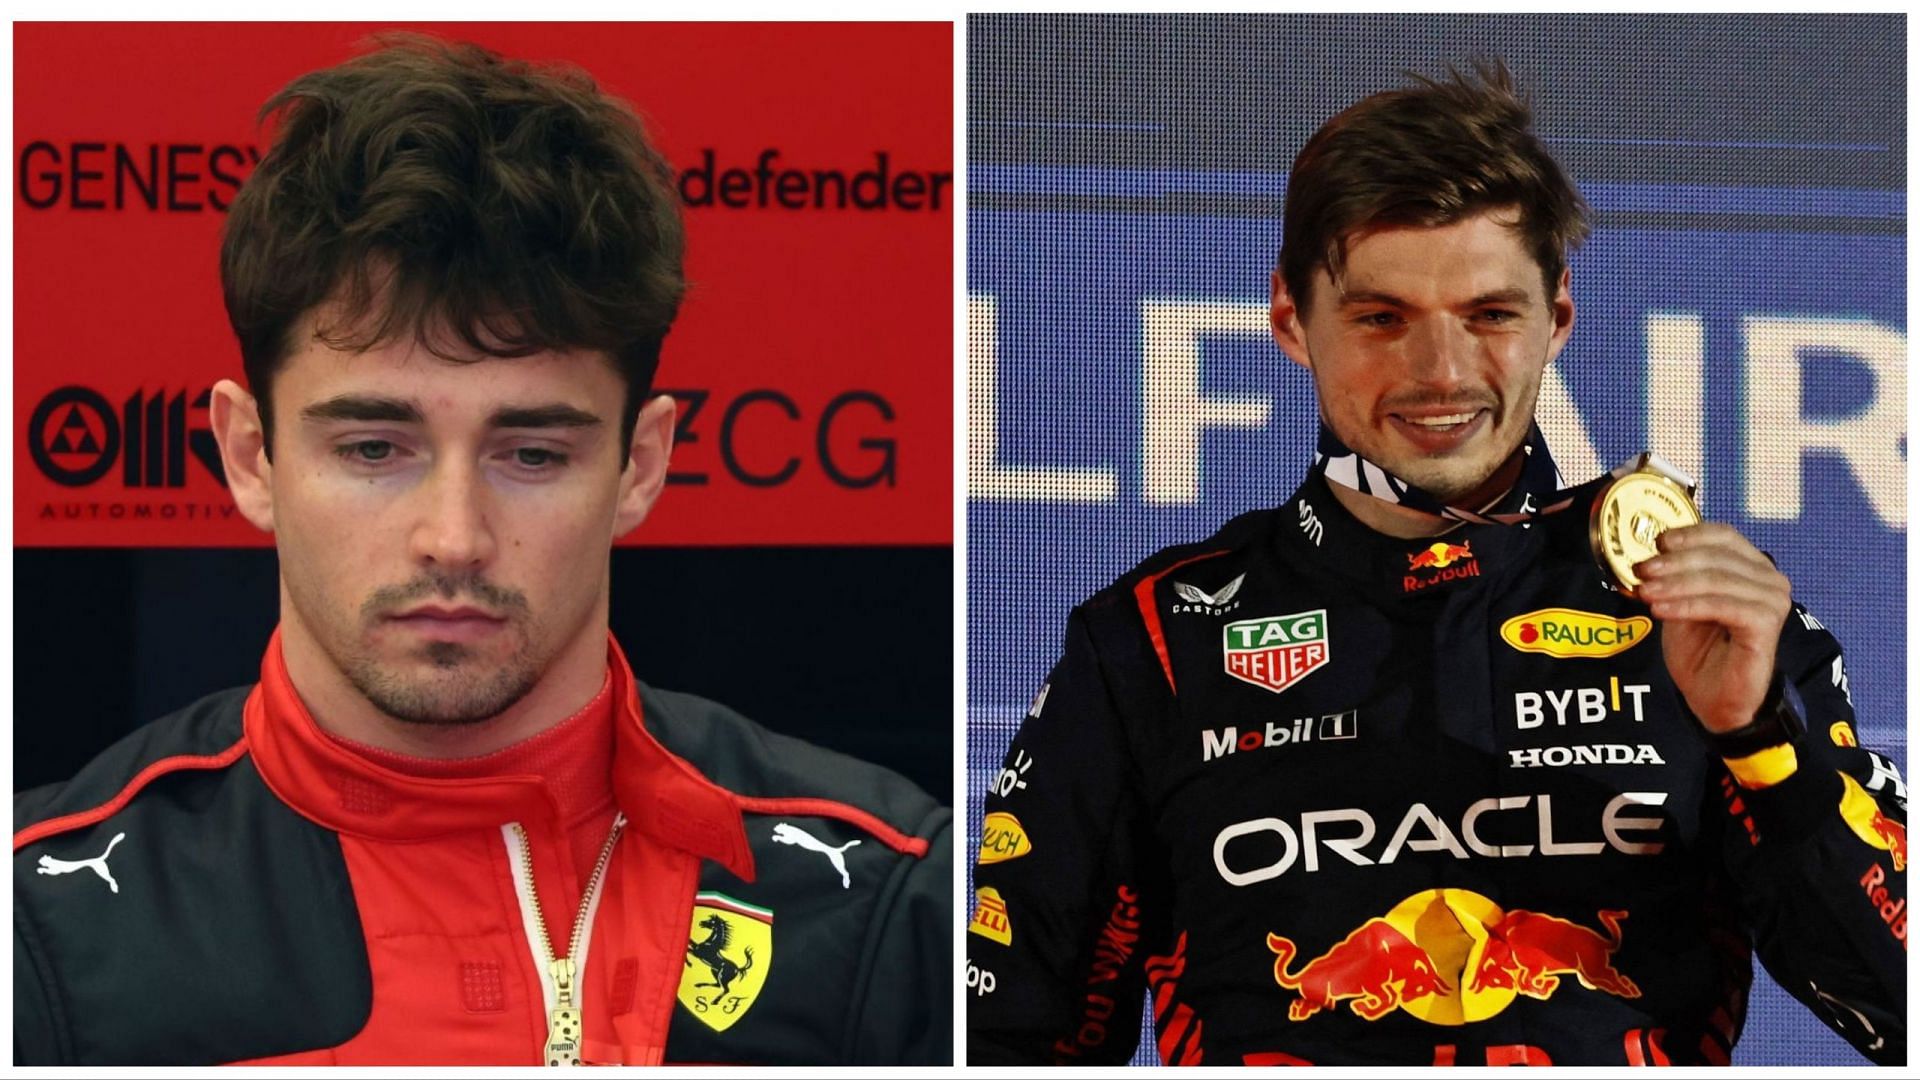 Charles Leclerc and Max Verstappen are some of the best talents in F1